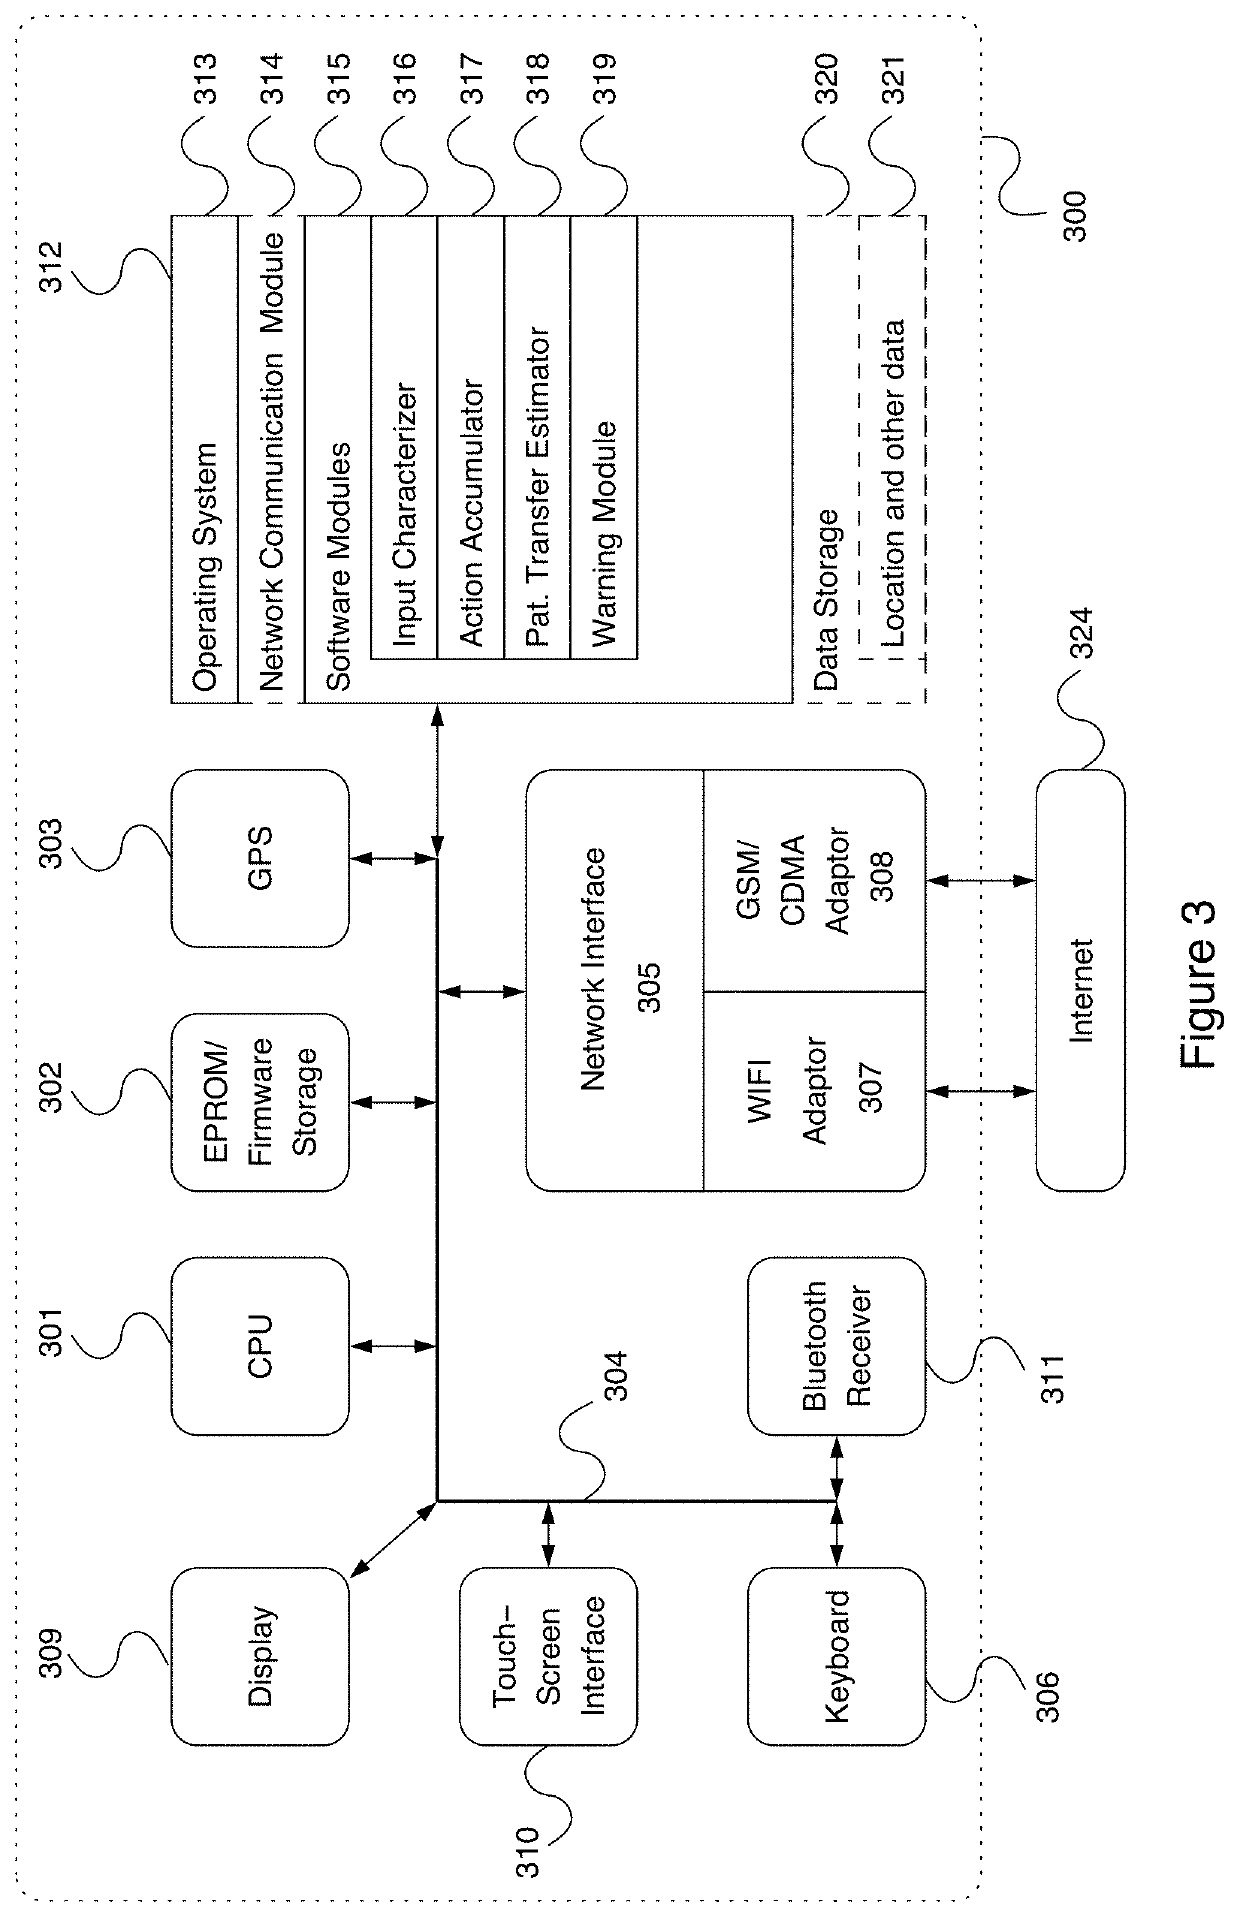 System and method for estimating pathogen transfer from mobile interaction in clinical environments and a warning system and method for reducing cross-contamination risks